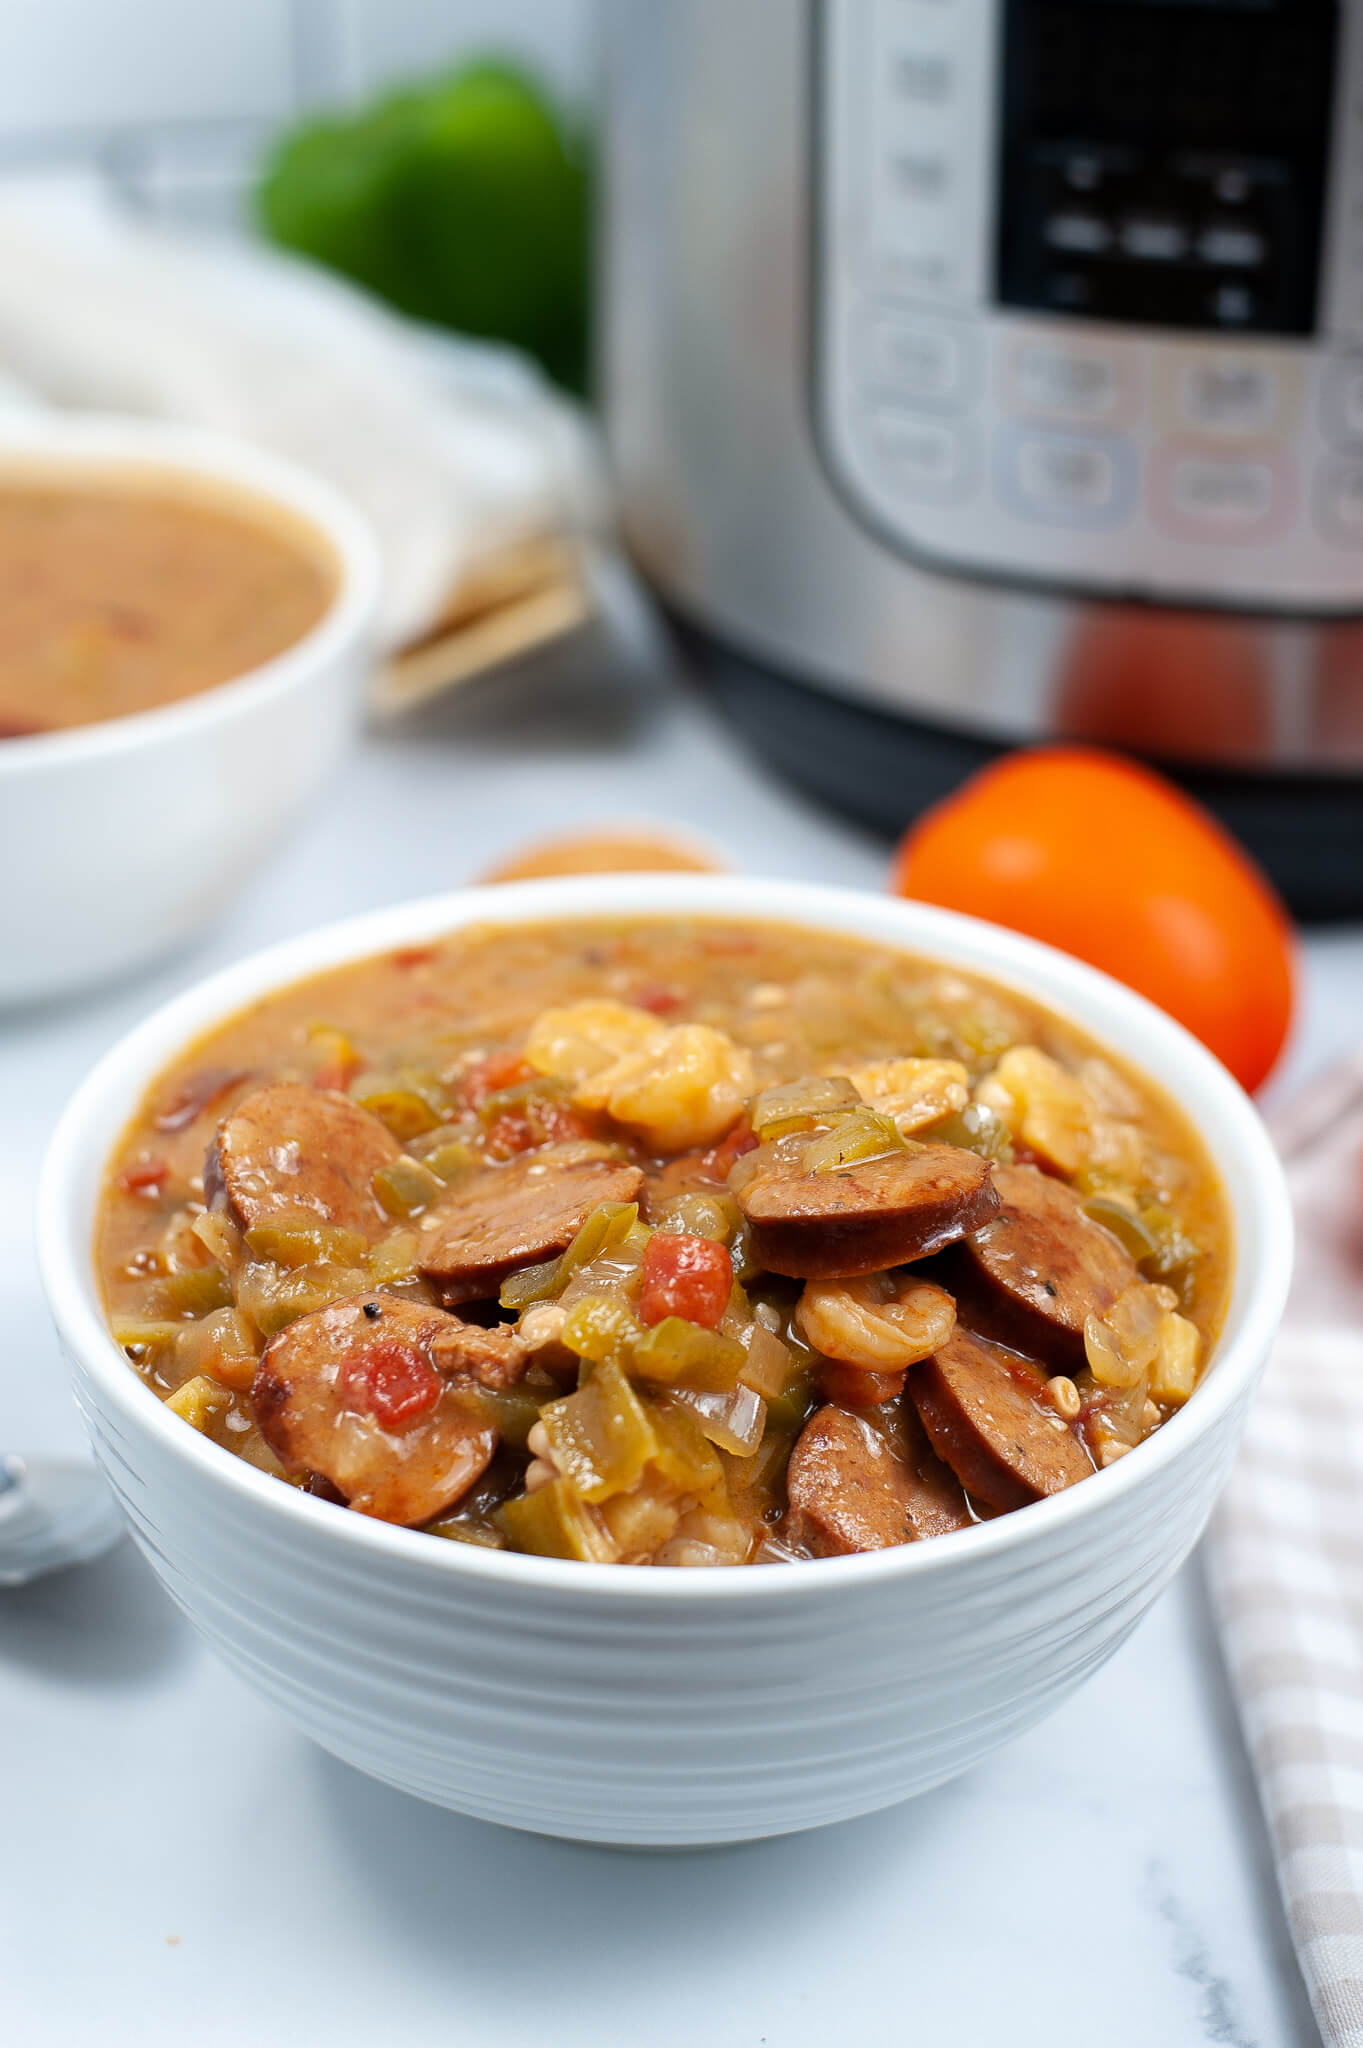 A dish of the delicious instant pot gumbo stew.